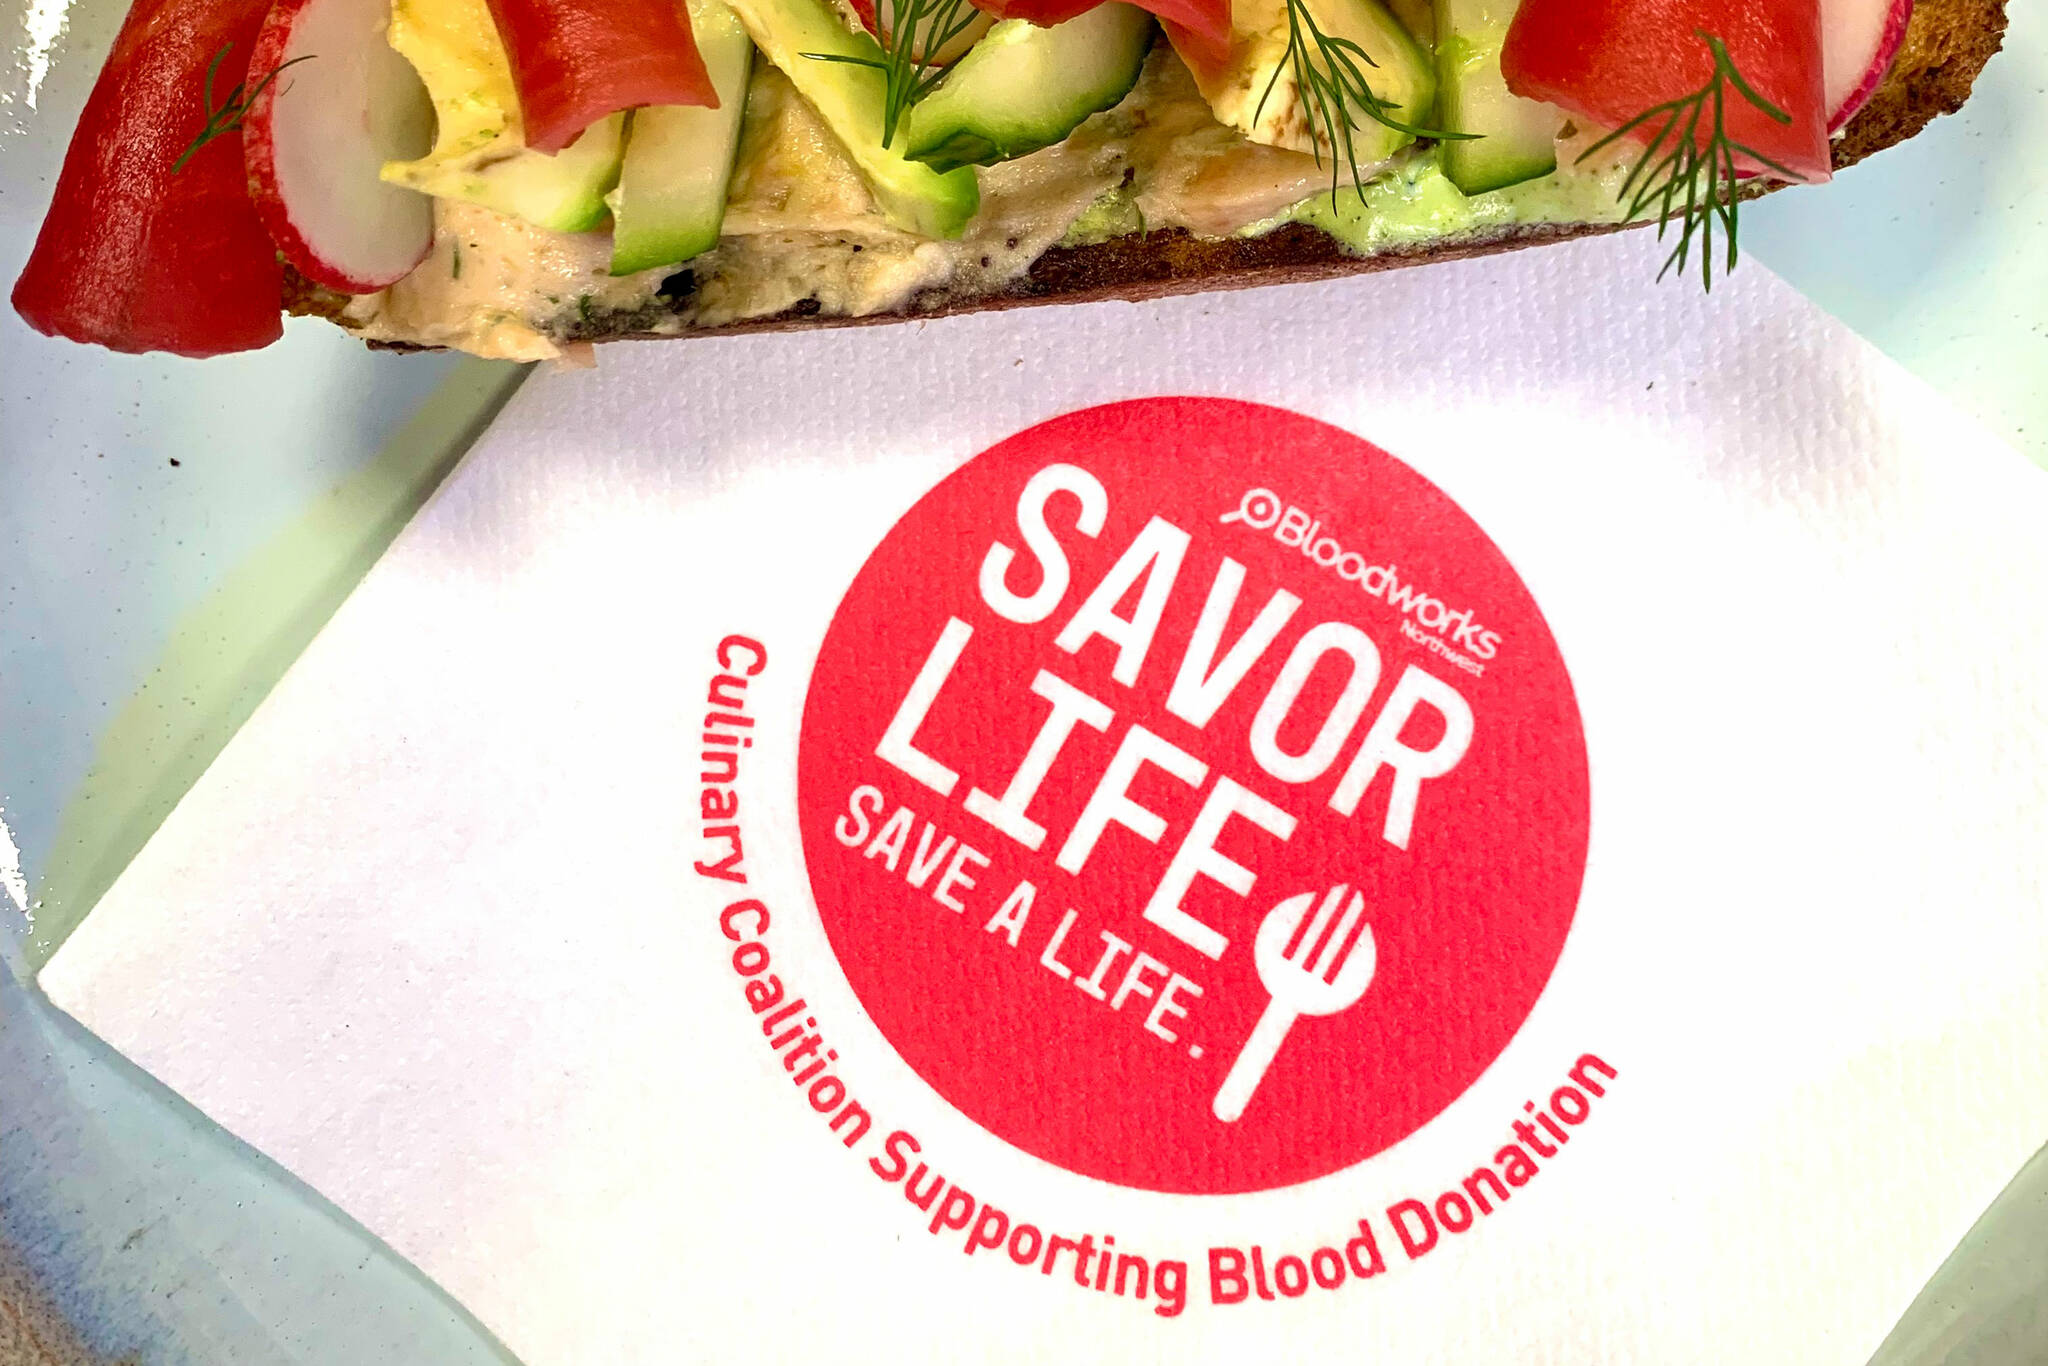 Bloodworks Northwest and foodies partner to raise awareness of need for blood donations